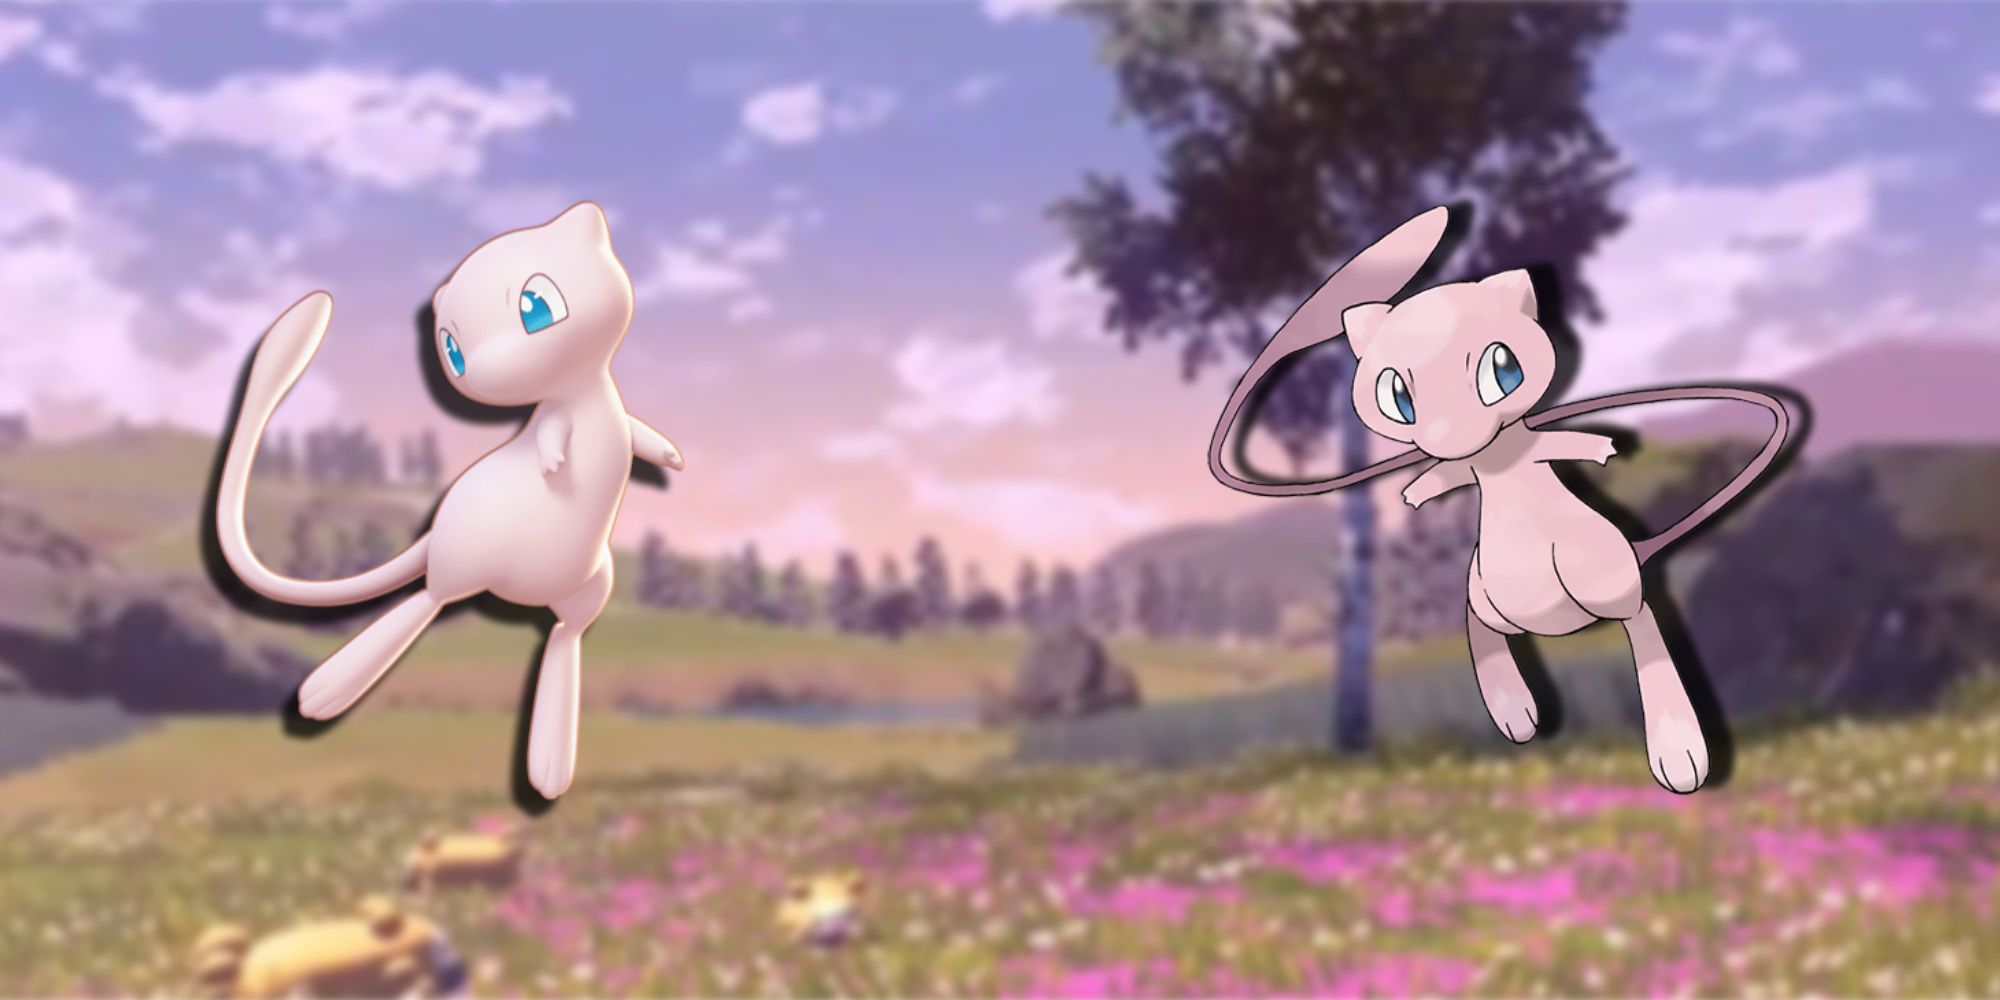 The pokemon Mew looks adorable but could likely kill a human